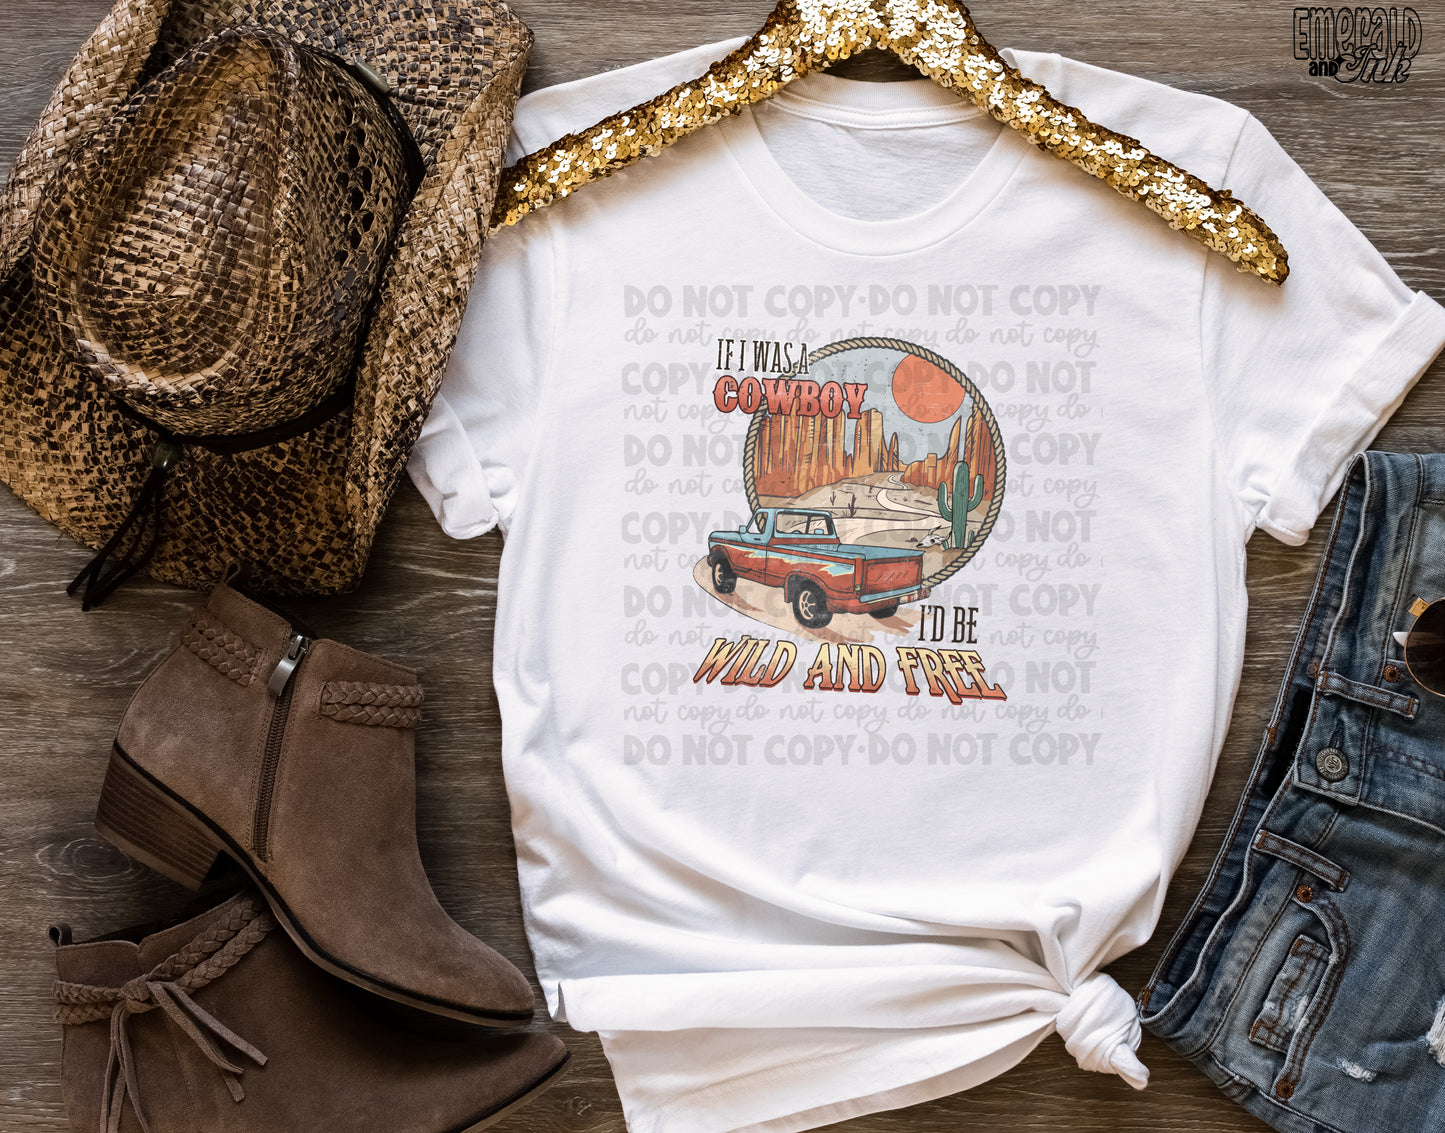 If I was a cowboy - Adult Size Sublimation Transfer